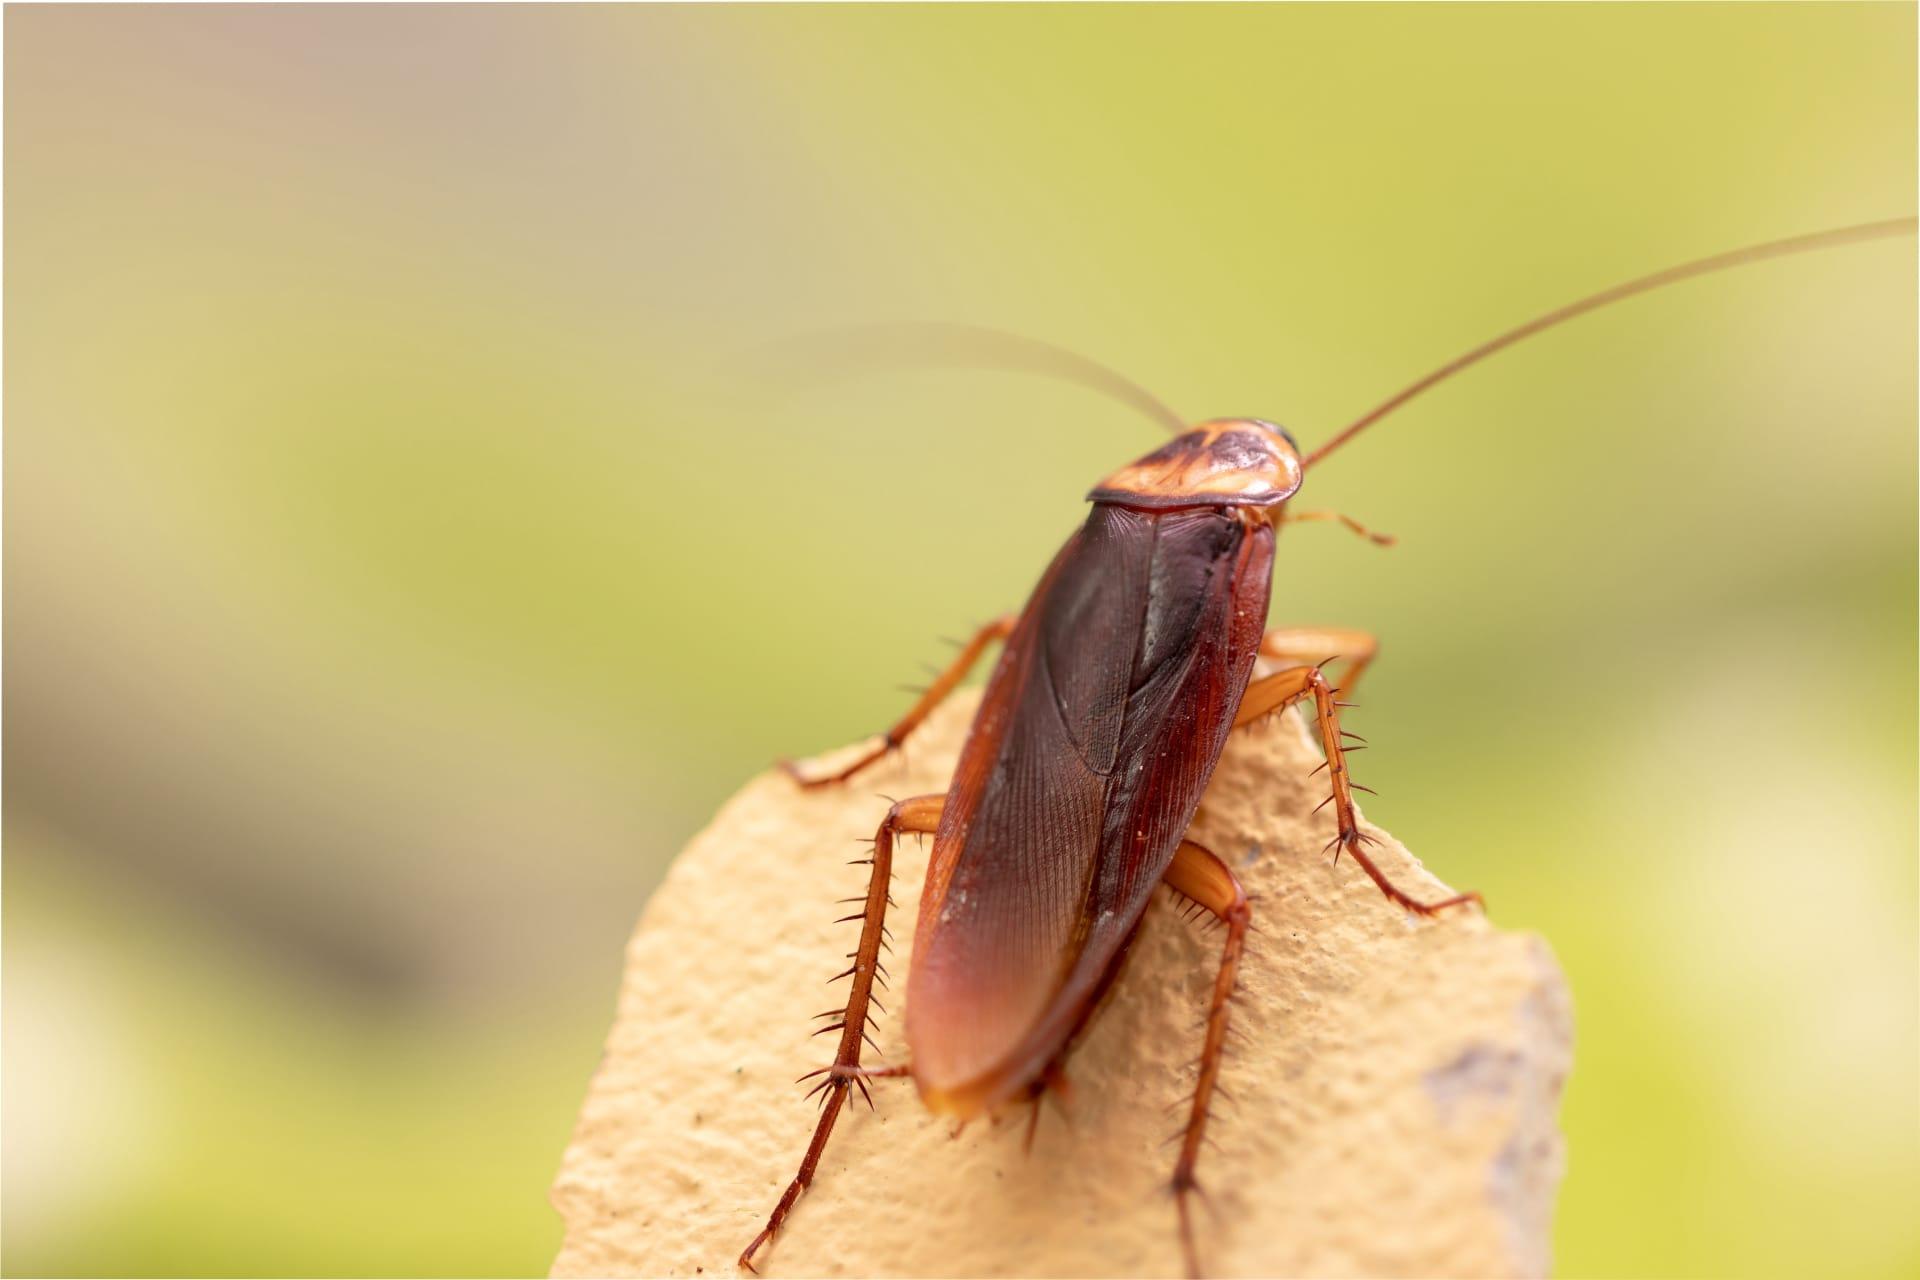 Cockroach pictures